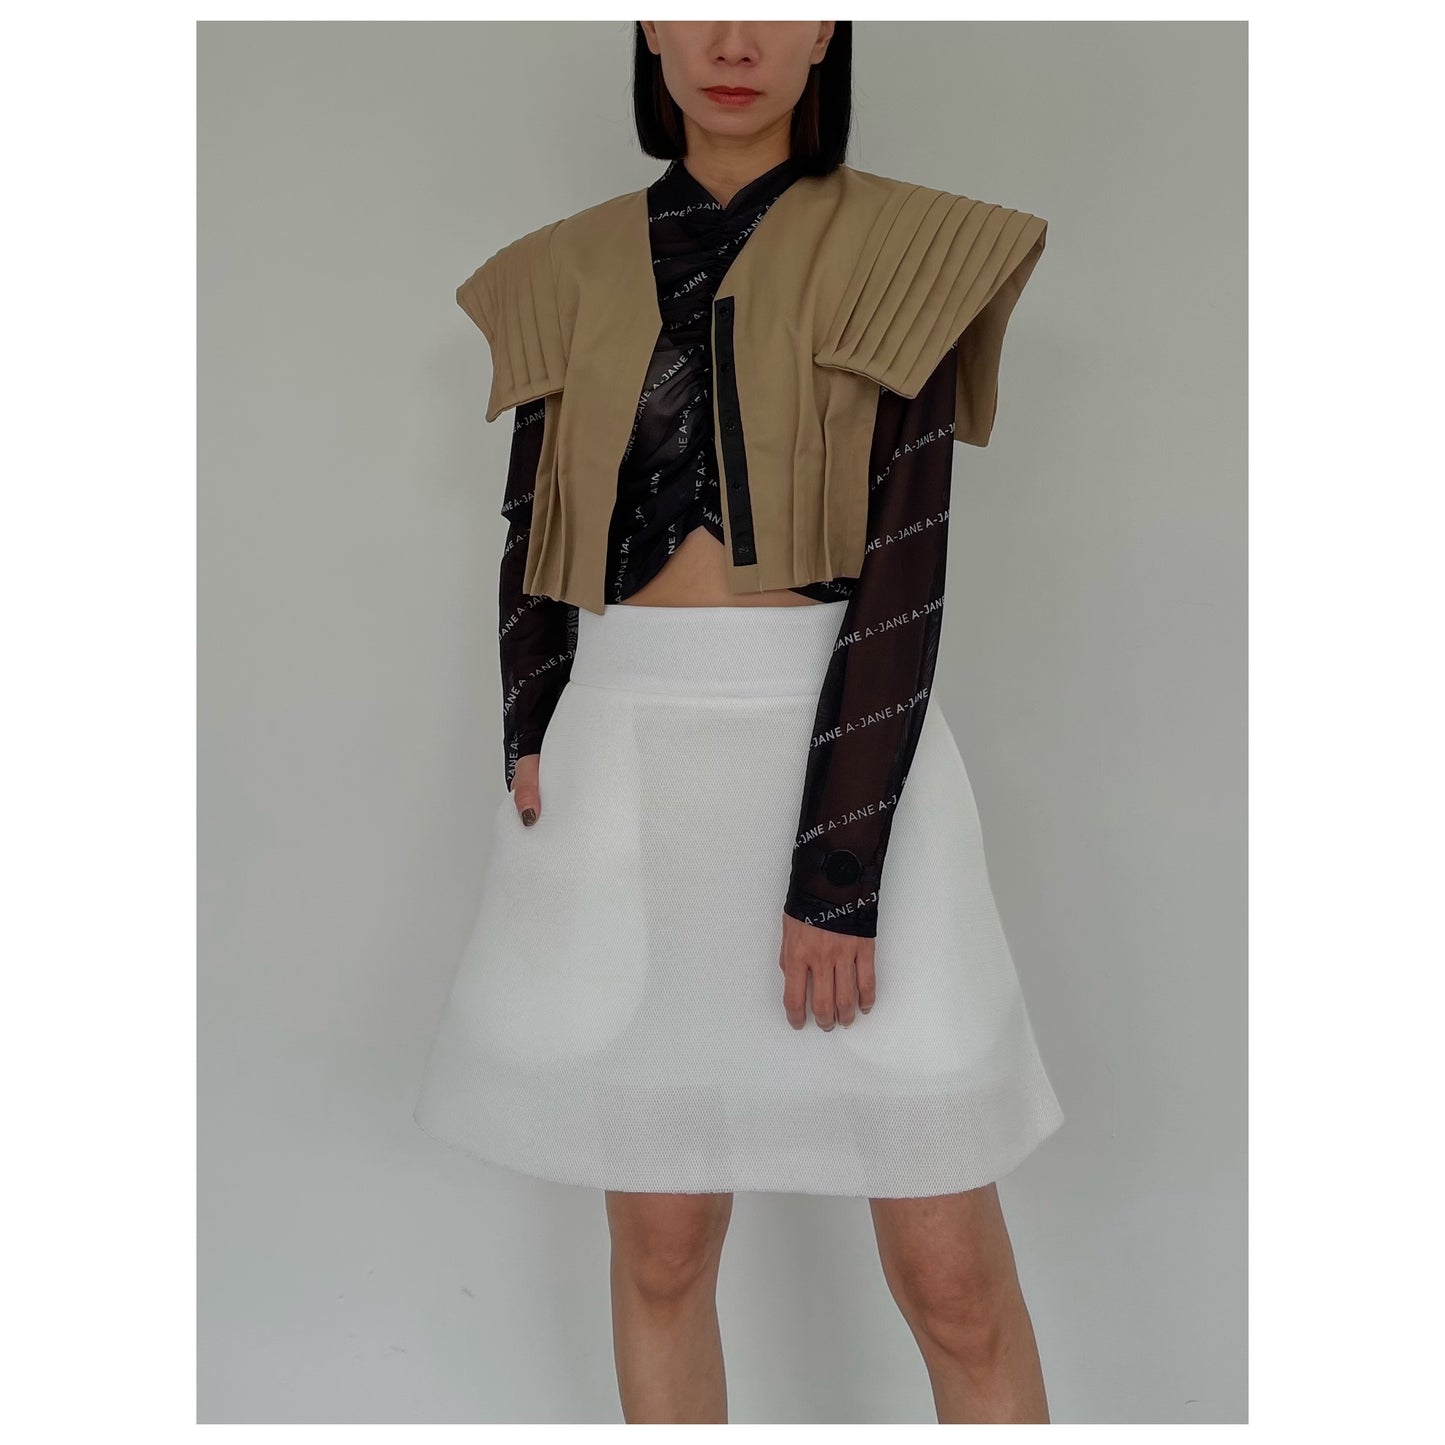 A-JANE Daffi Pleated Panel Sleeve V-Neck Crop Top